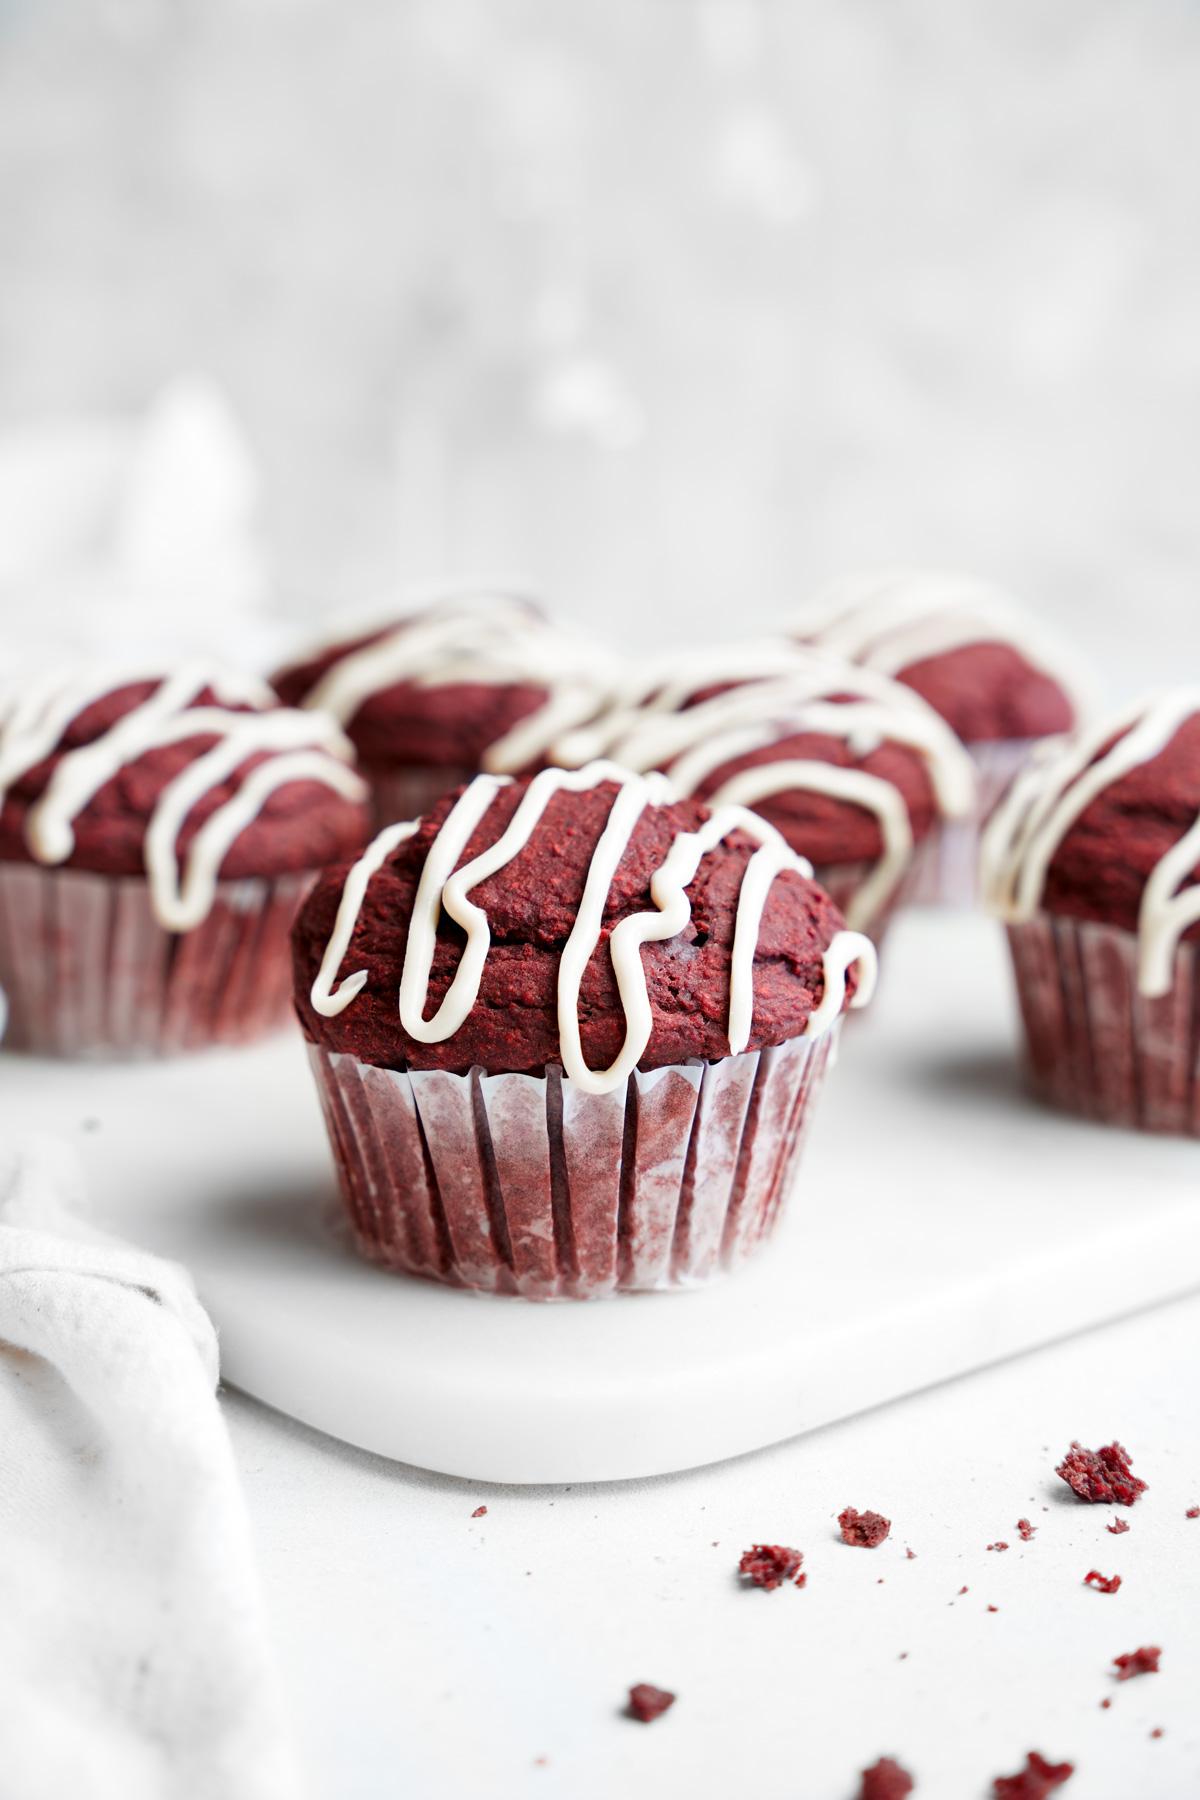 the vegan red velvet muffins lined up with the cream cheese glaze on top